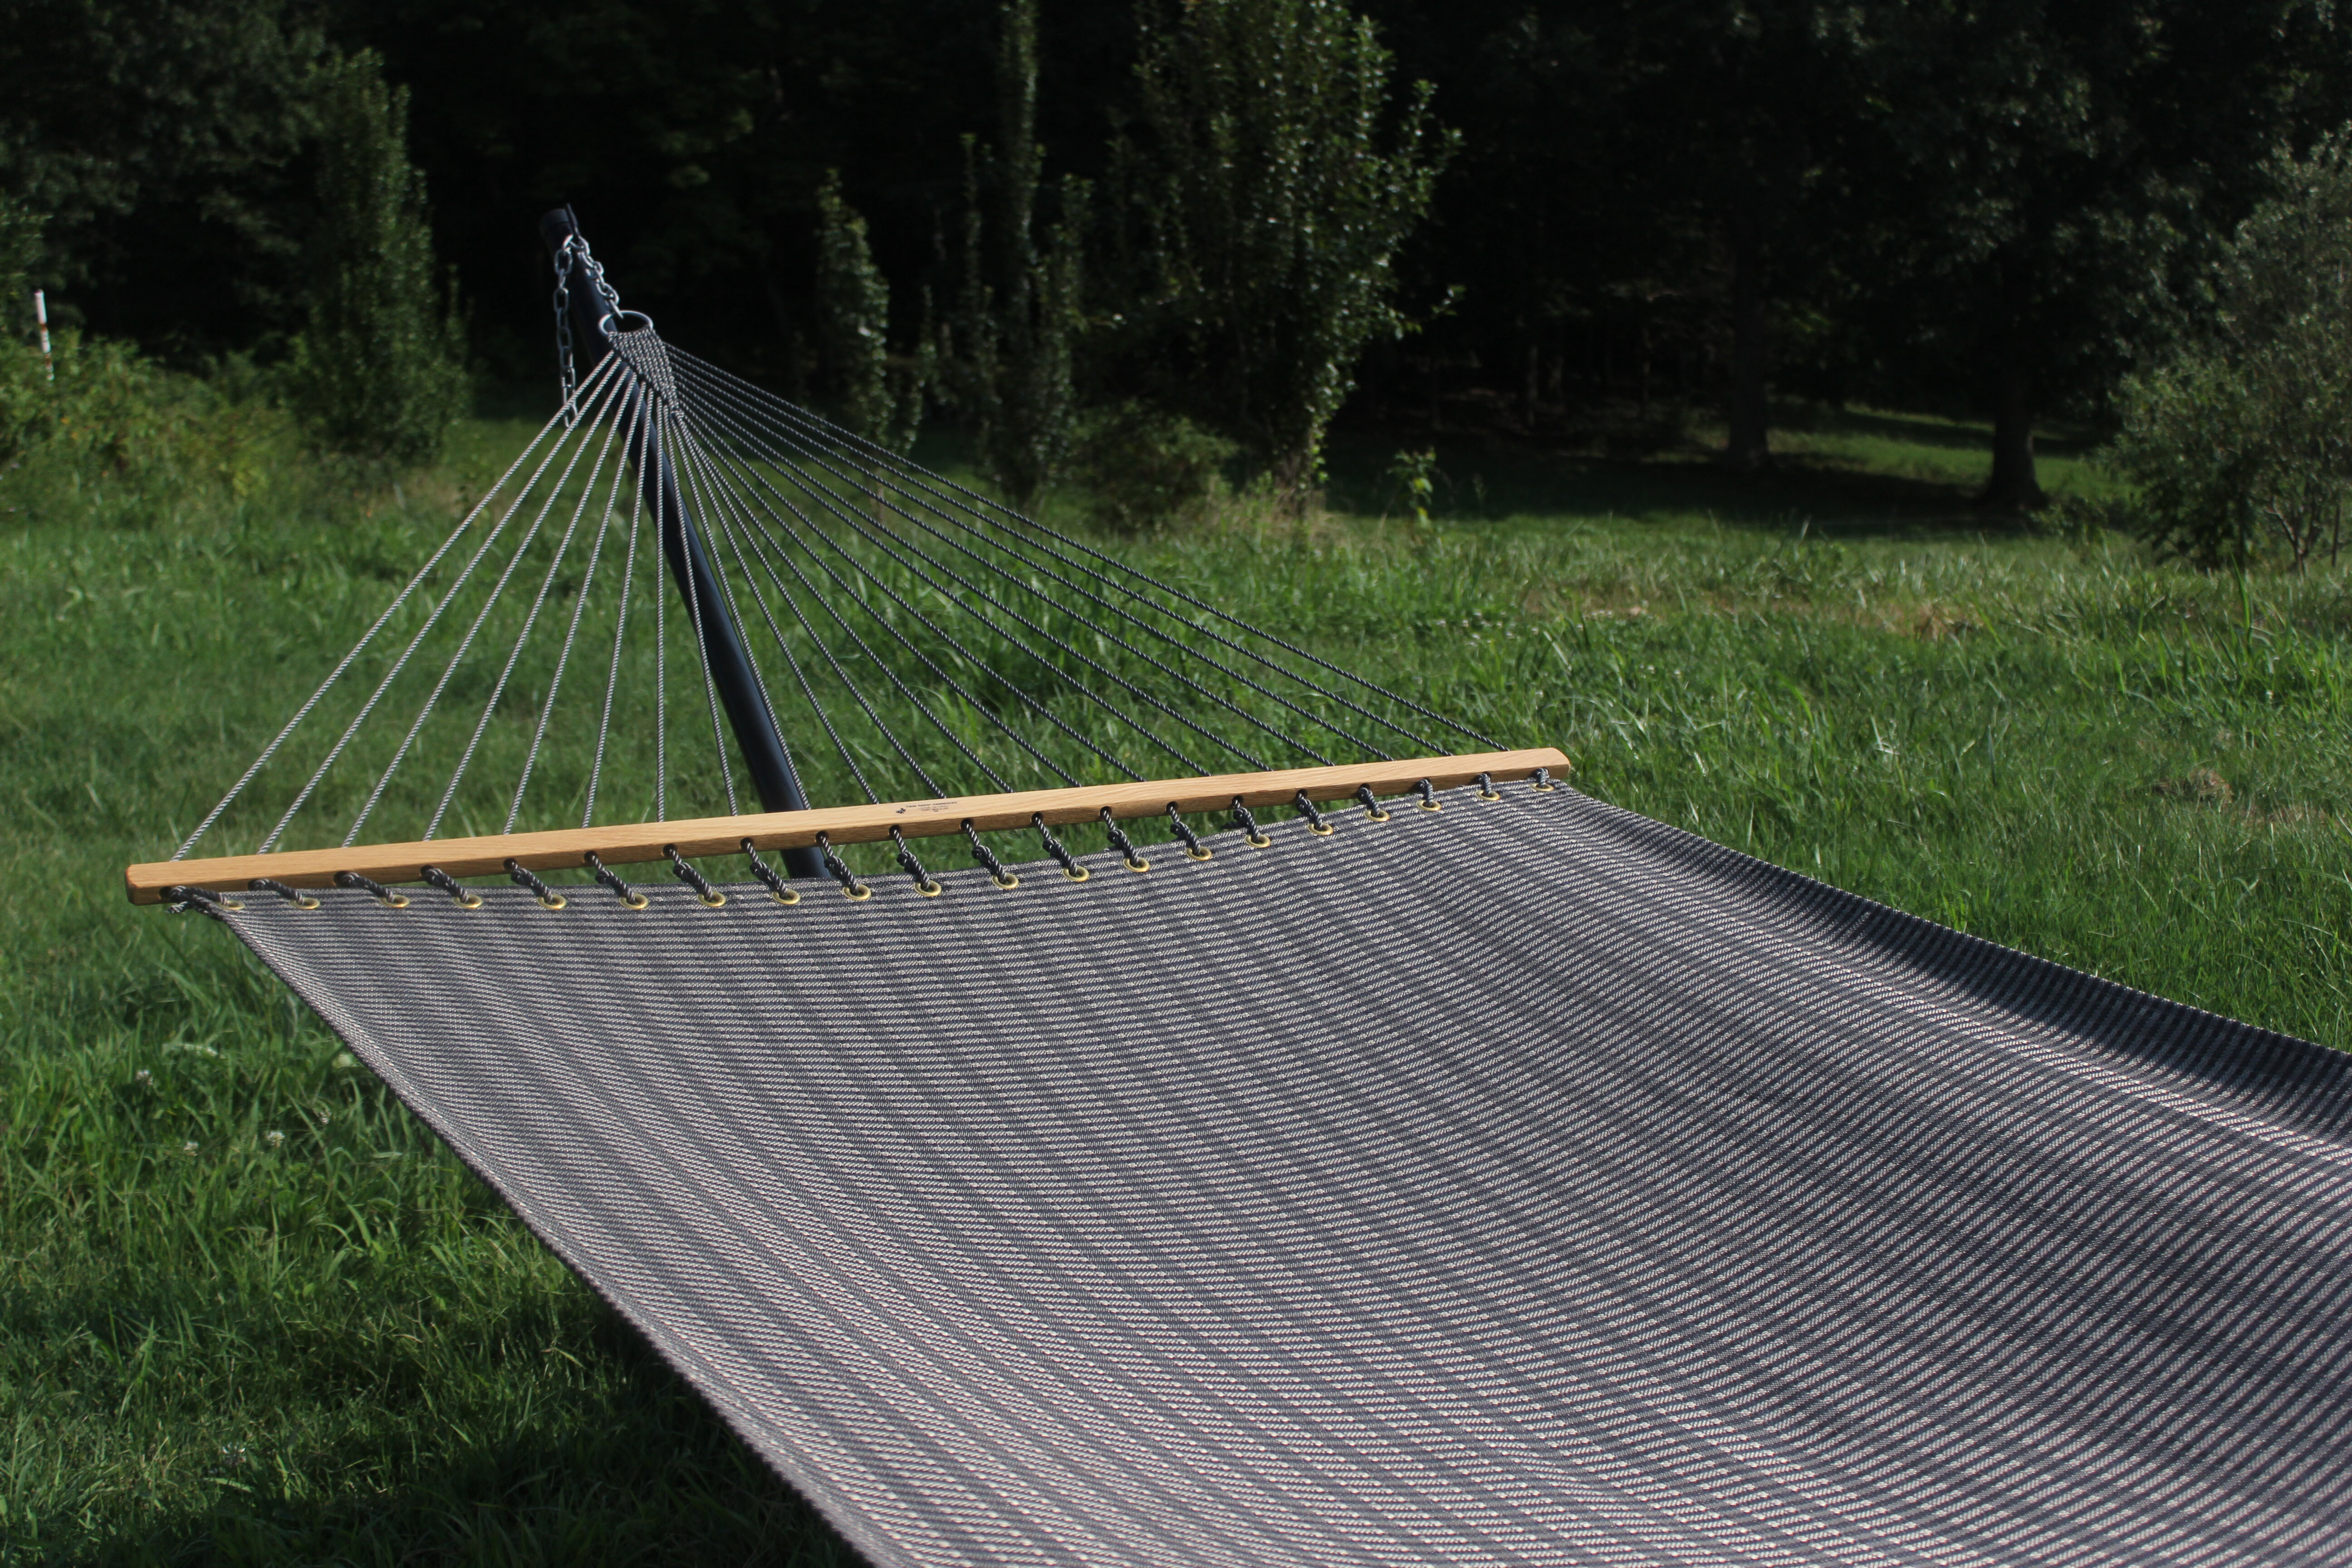 Max 475lbs Capacity Gafete Large Two Person Hammock with Stand Included Heavy Duty Portable Cotton Double Hammocks with Hardwood Spreader Bar Soft Pillow for Patio Outdoor Aqua 